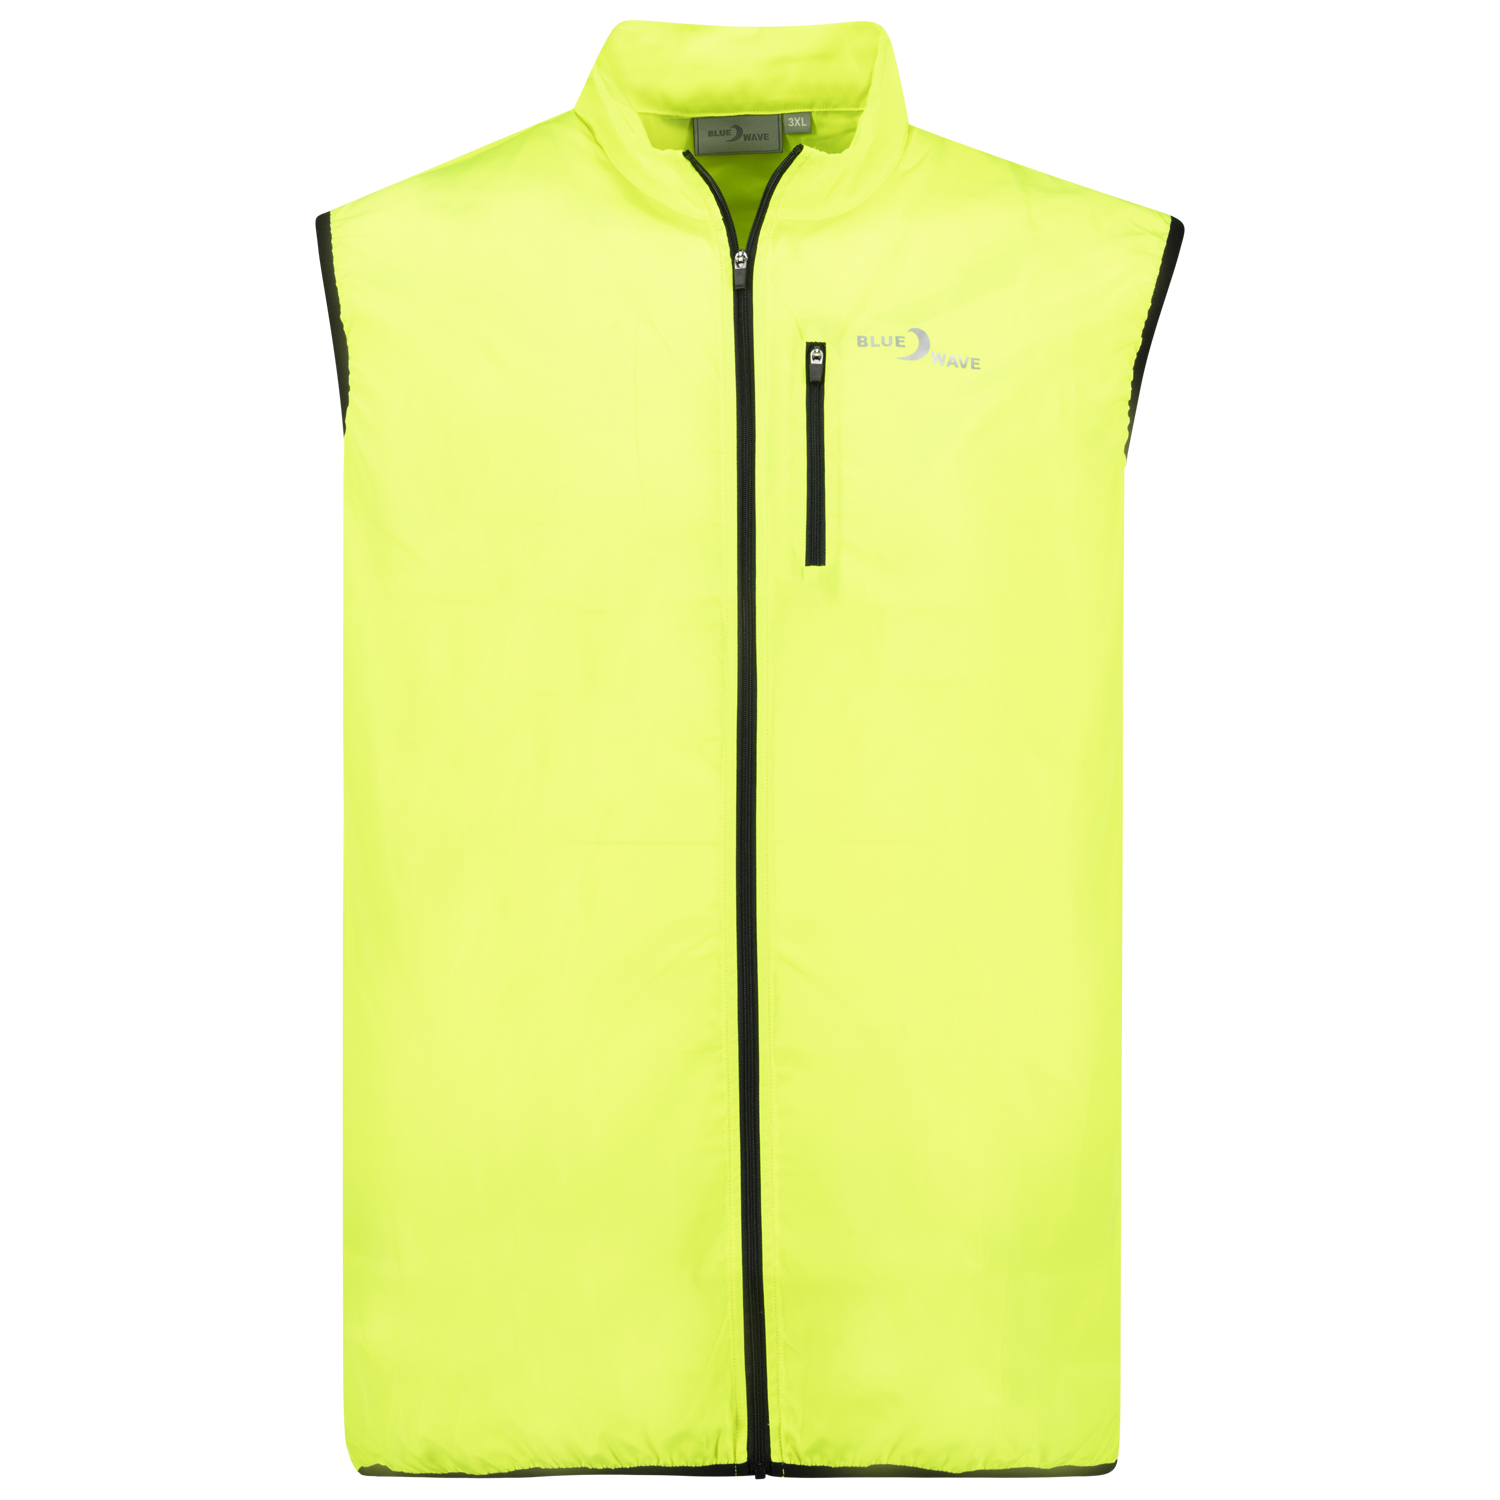 Bike waistcoat "Adrian" in neon yellow by Blue Wave for men up to oversize 10XL